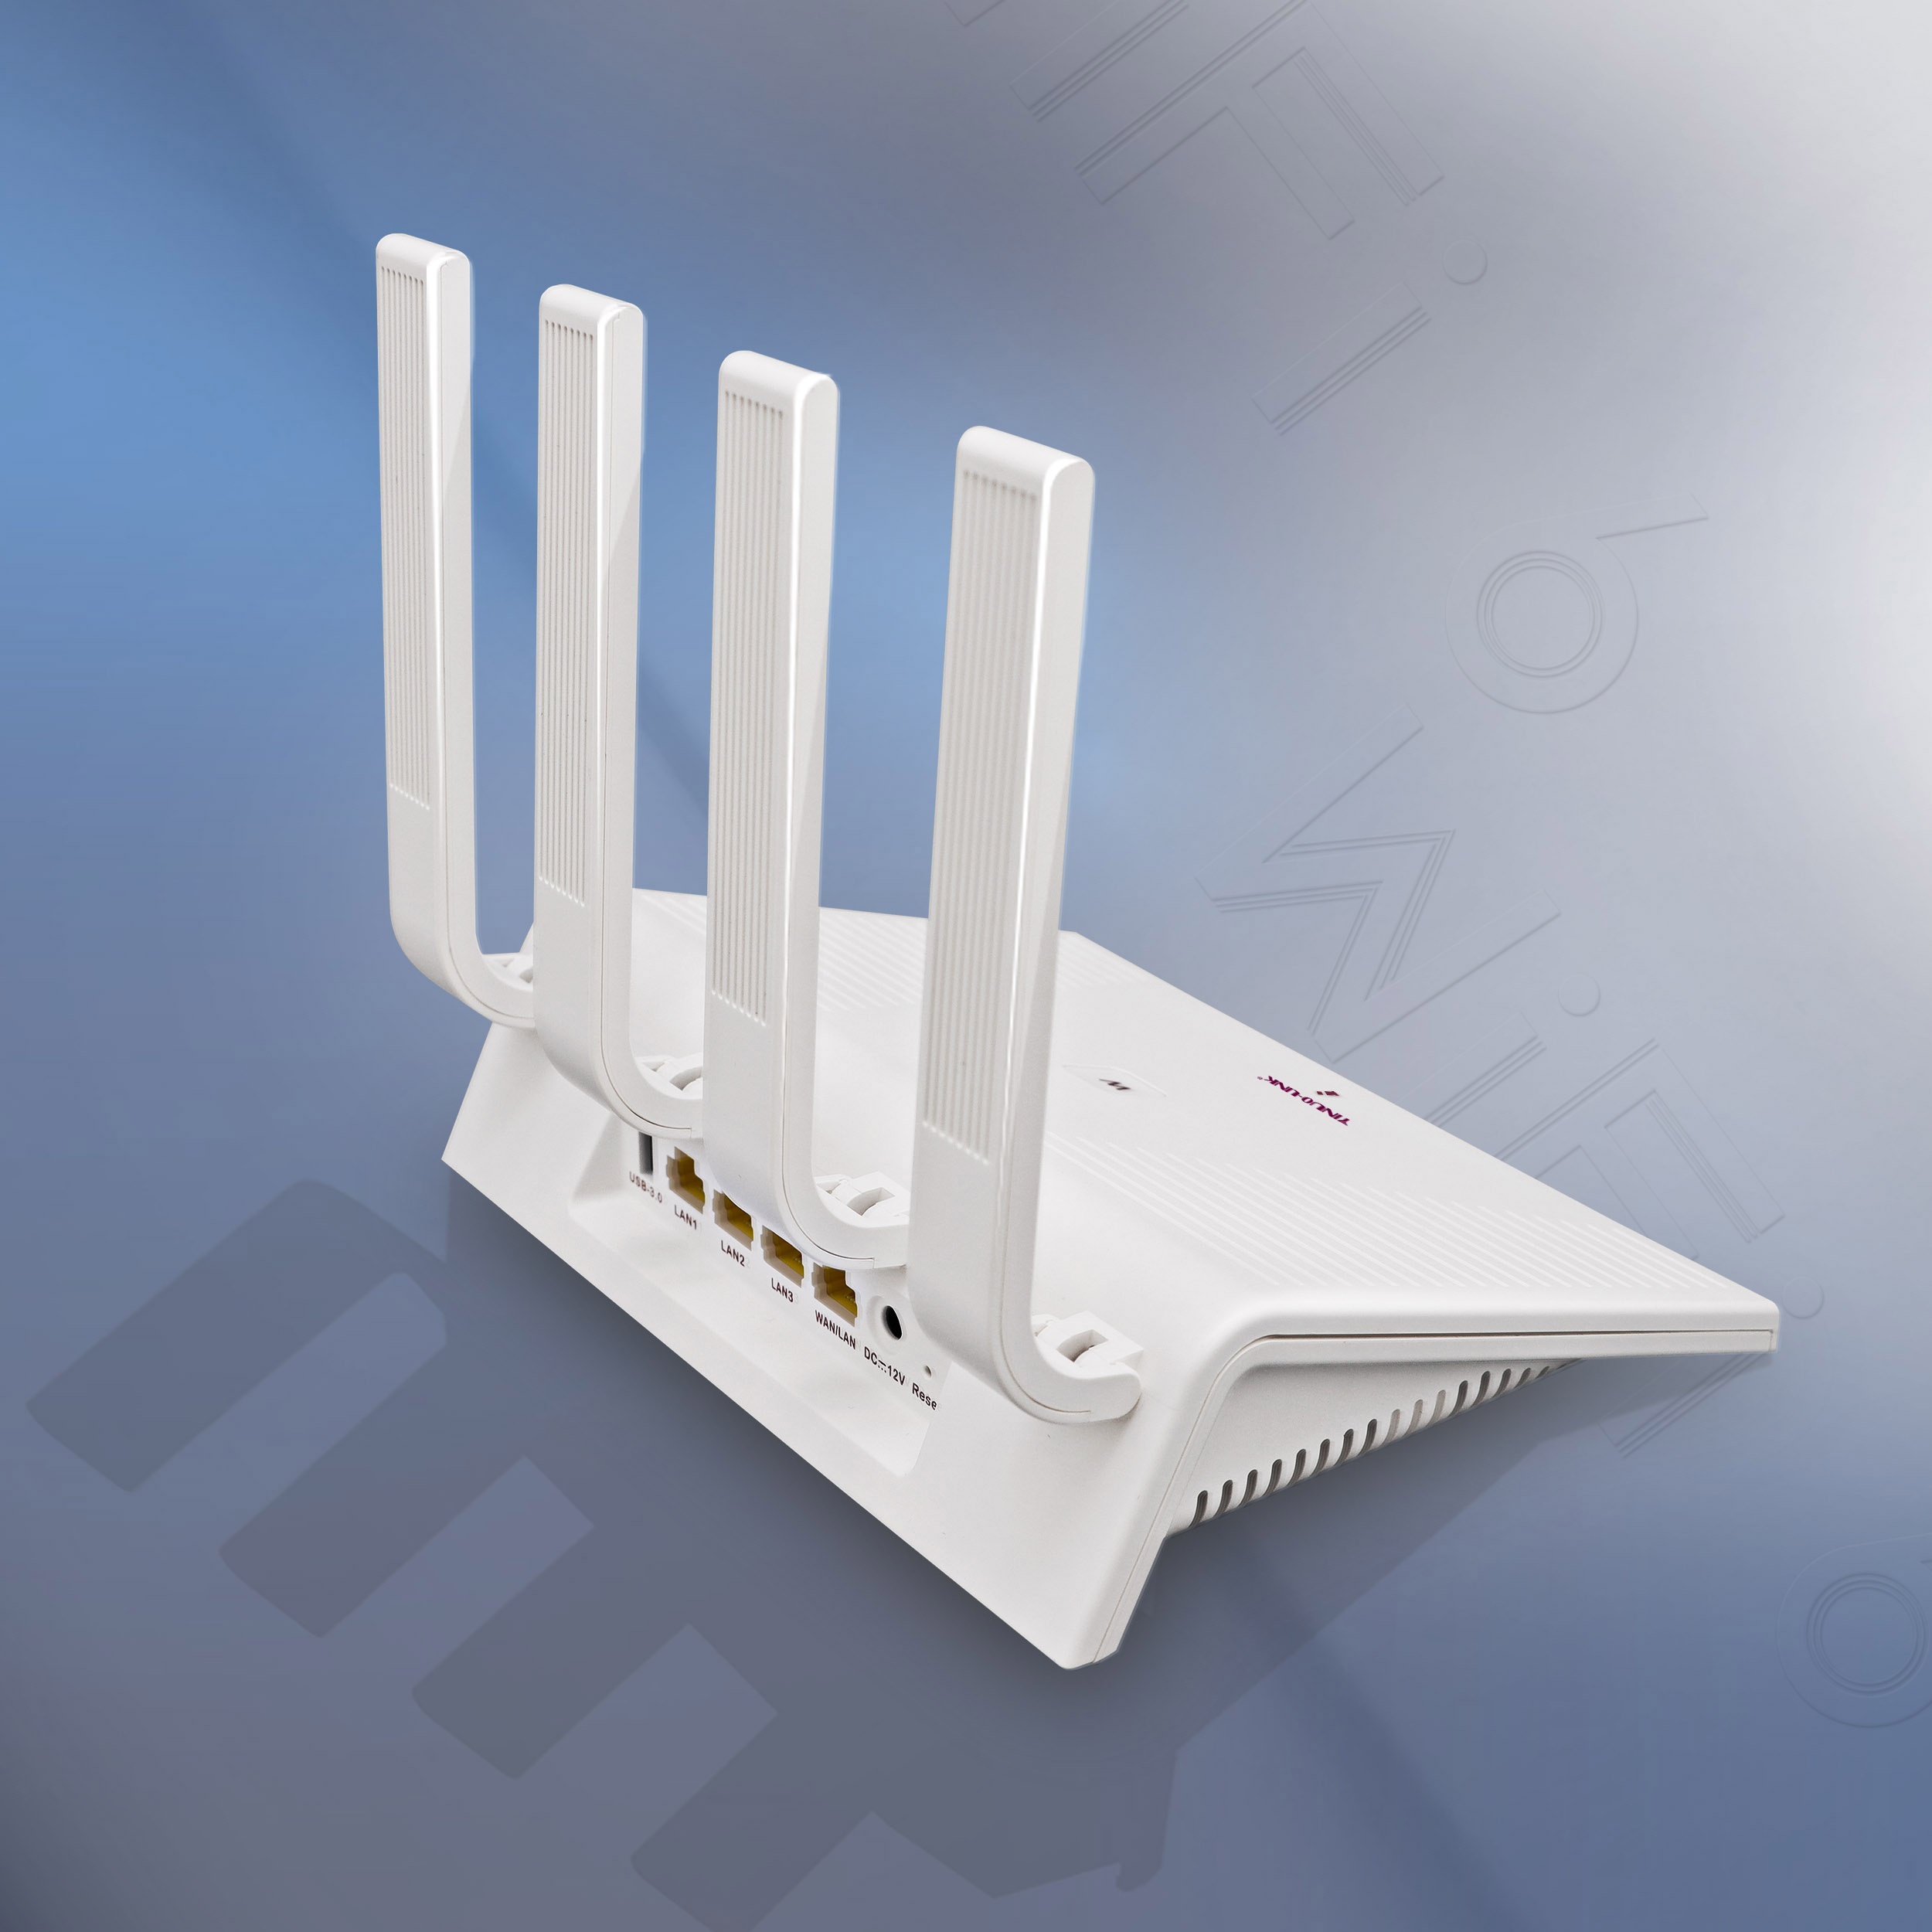 Revolutionize Your Network with YINUO-LINK's Y1 AX1800 Dual Band Wi-Fi6 Router